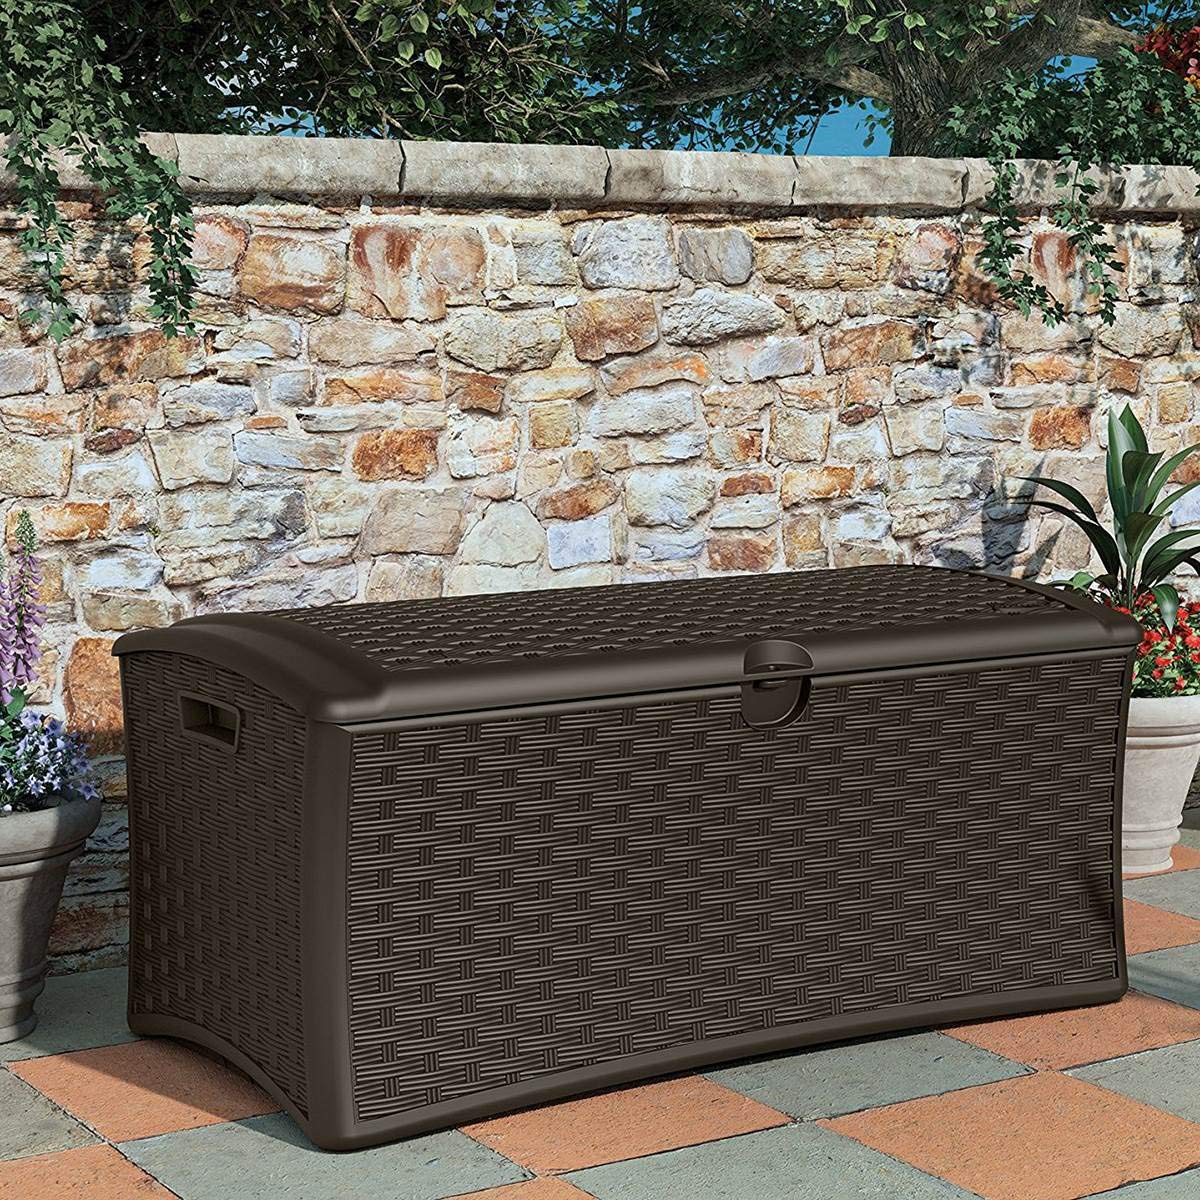 Suncast 72 Gallon Resin Wicker Outdoor Patio Storage Deck Box, Brown (12 Pack) 72 gallon - 12 Pack